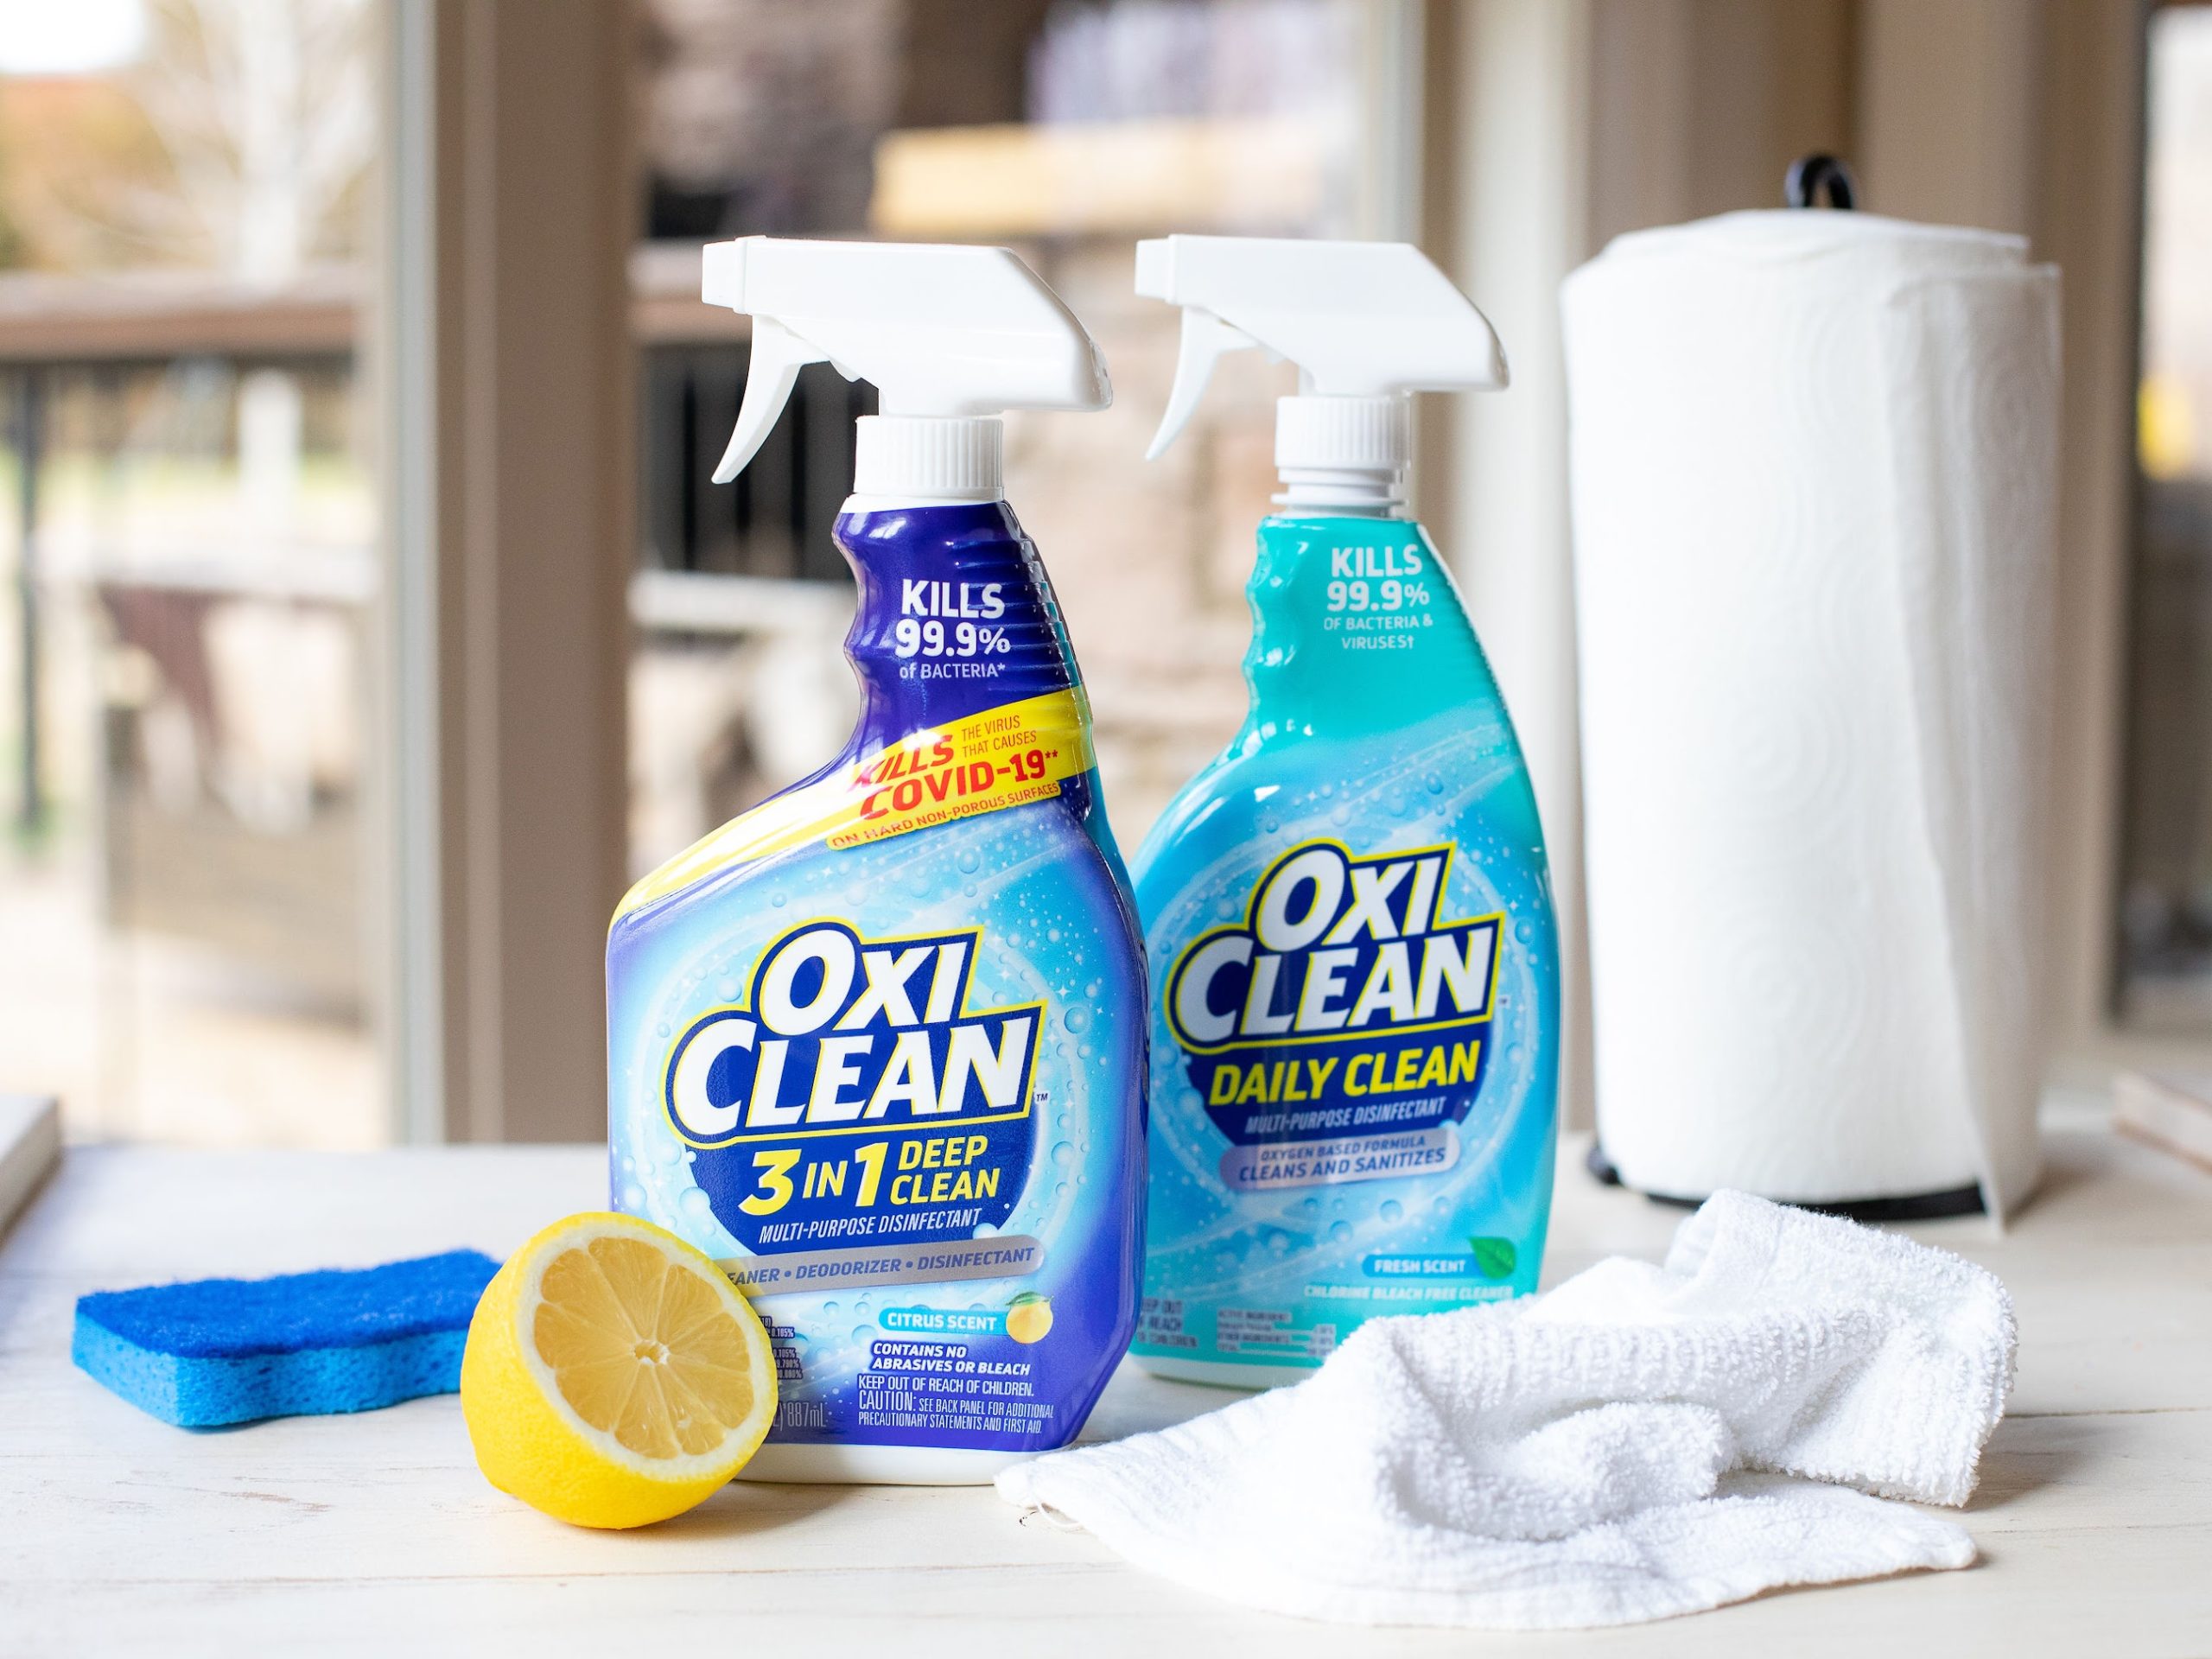 Pick Up OxiClean™ Multi-Purpose Disinfectant Cleaners On Sale At Publix on I Heart Publix